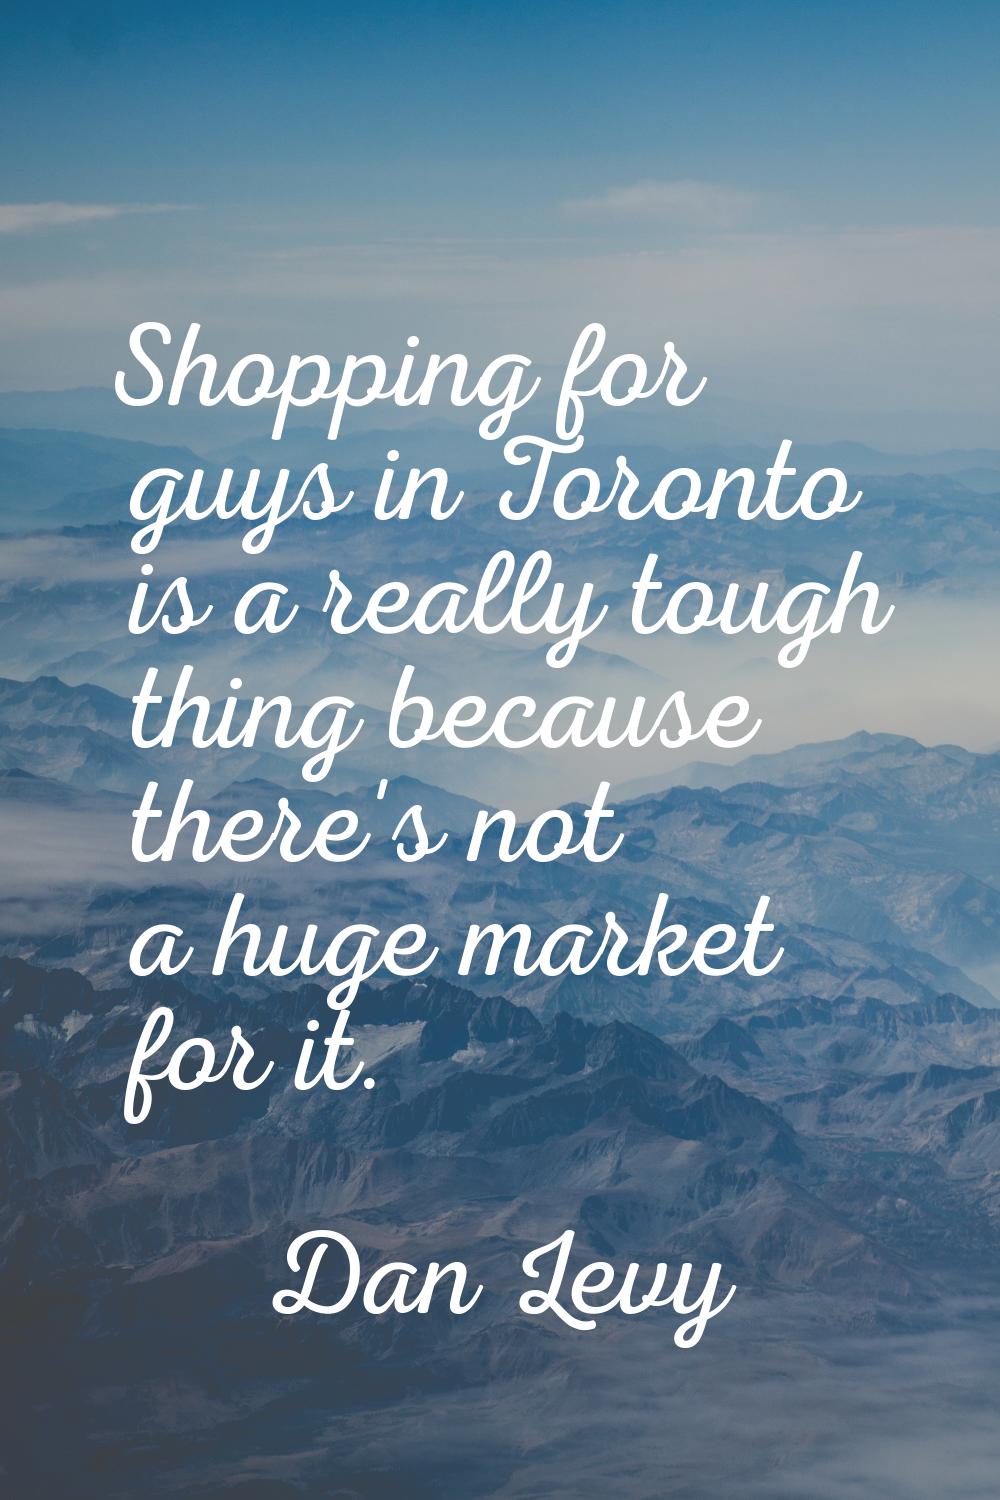 Shopping for guys in Toronto is a really tough thing because there's not a huge market for it.